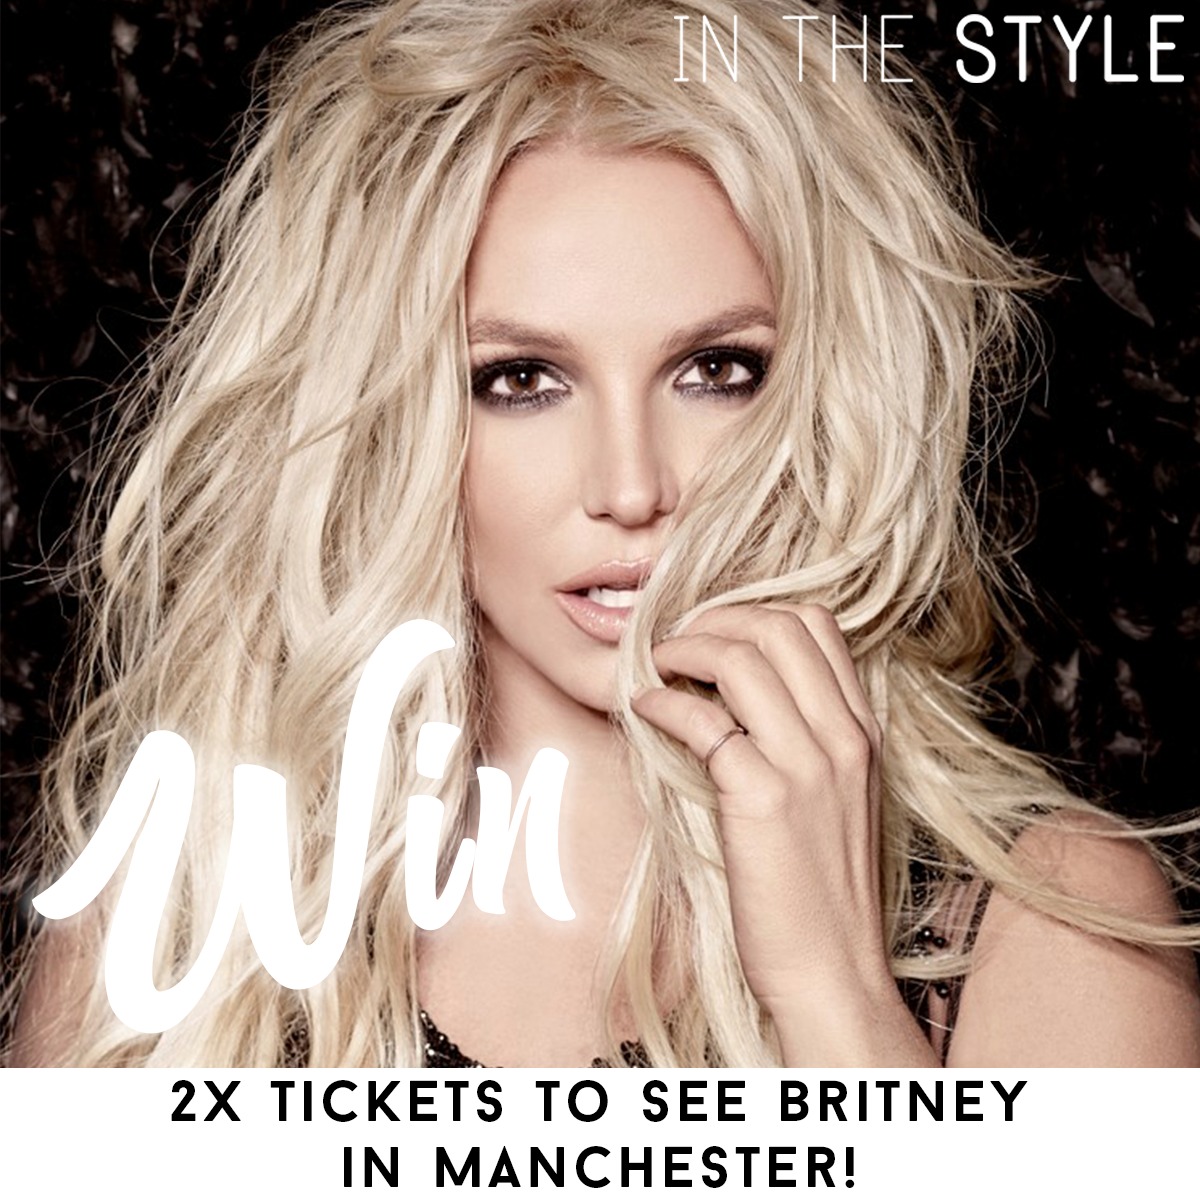 WIN TWO TICKETS TO SEE BRITNEY, B*TCH! | In The Style